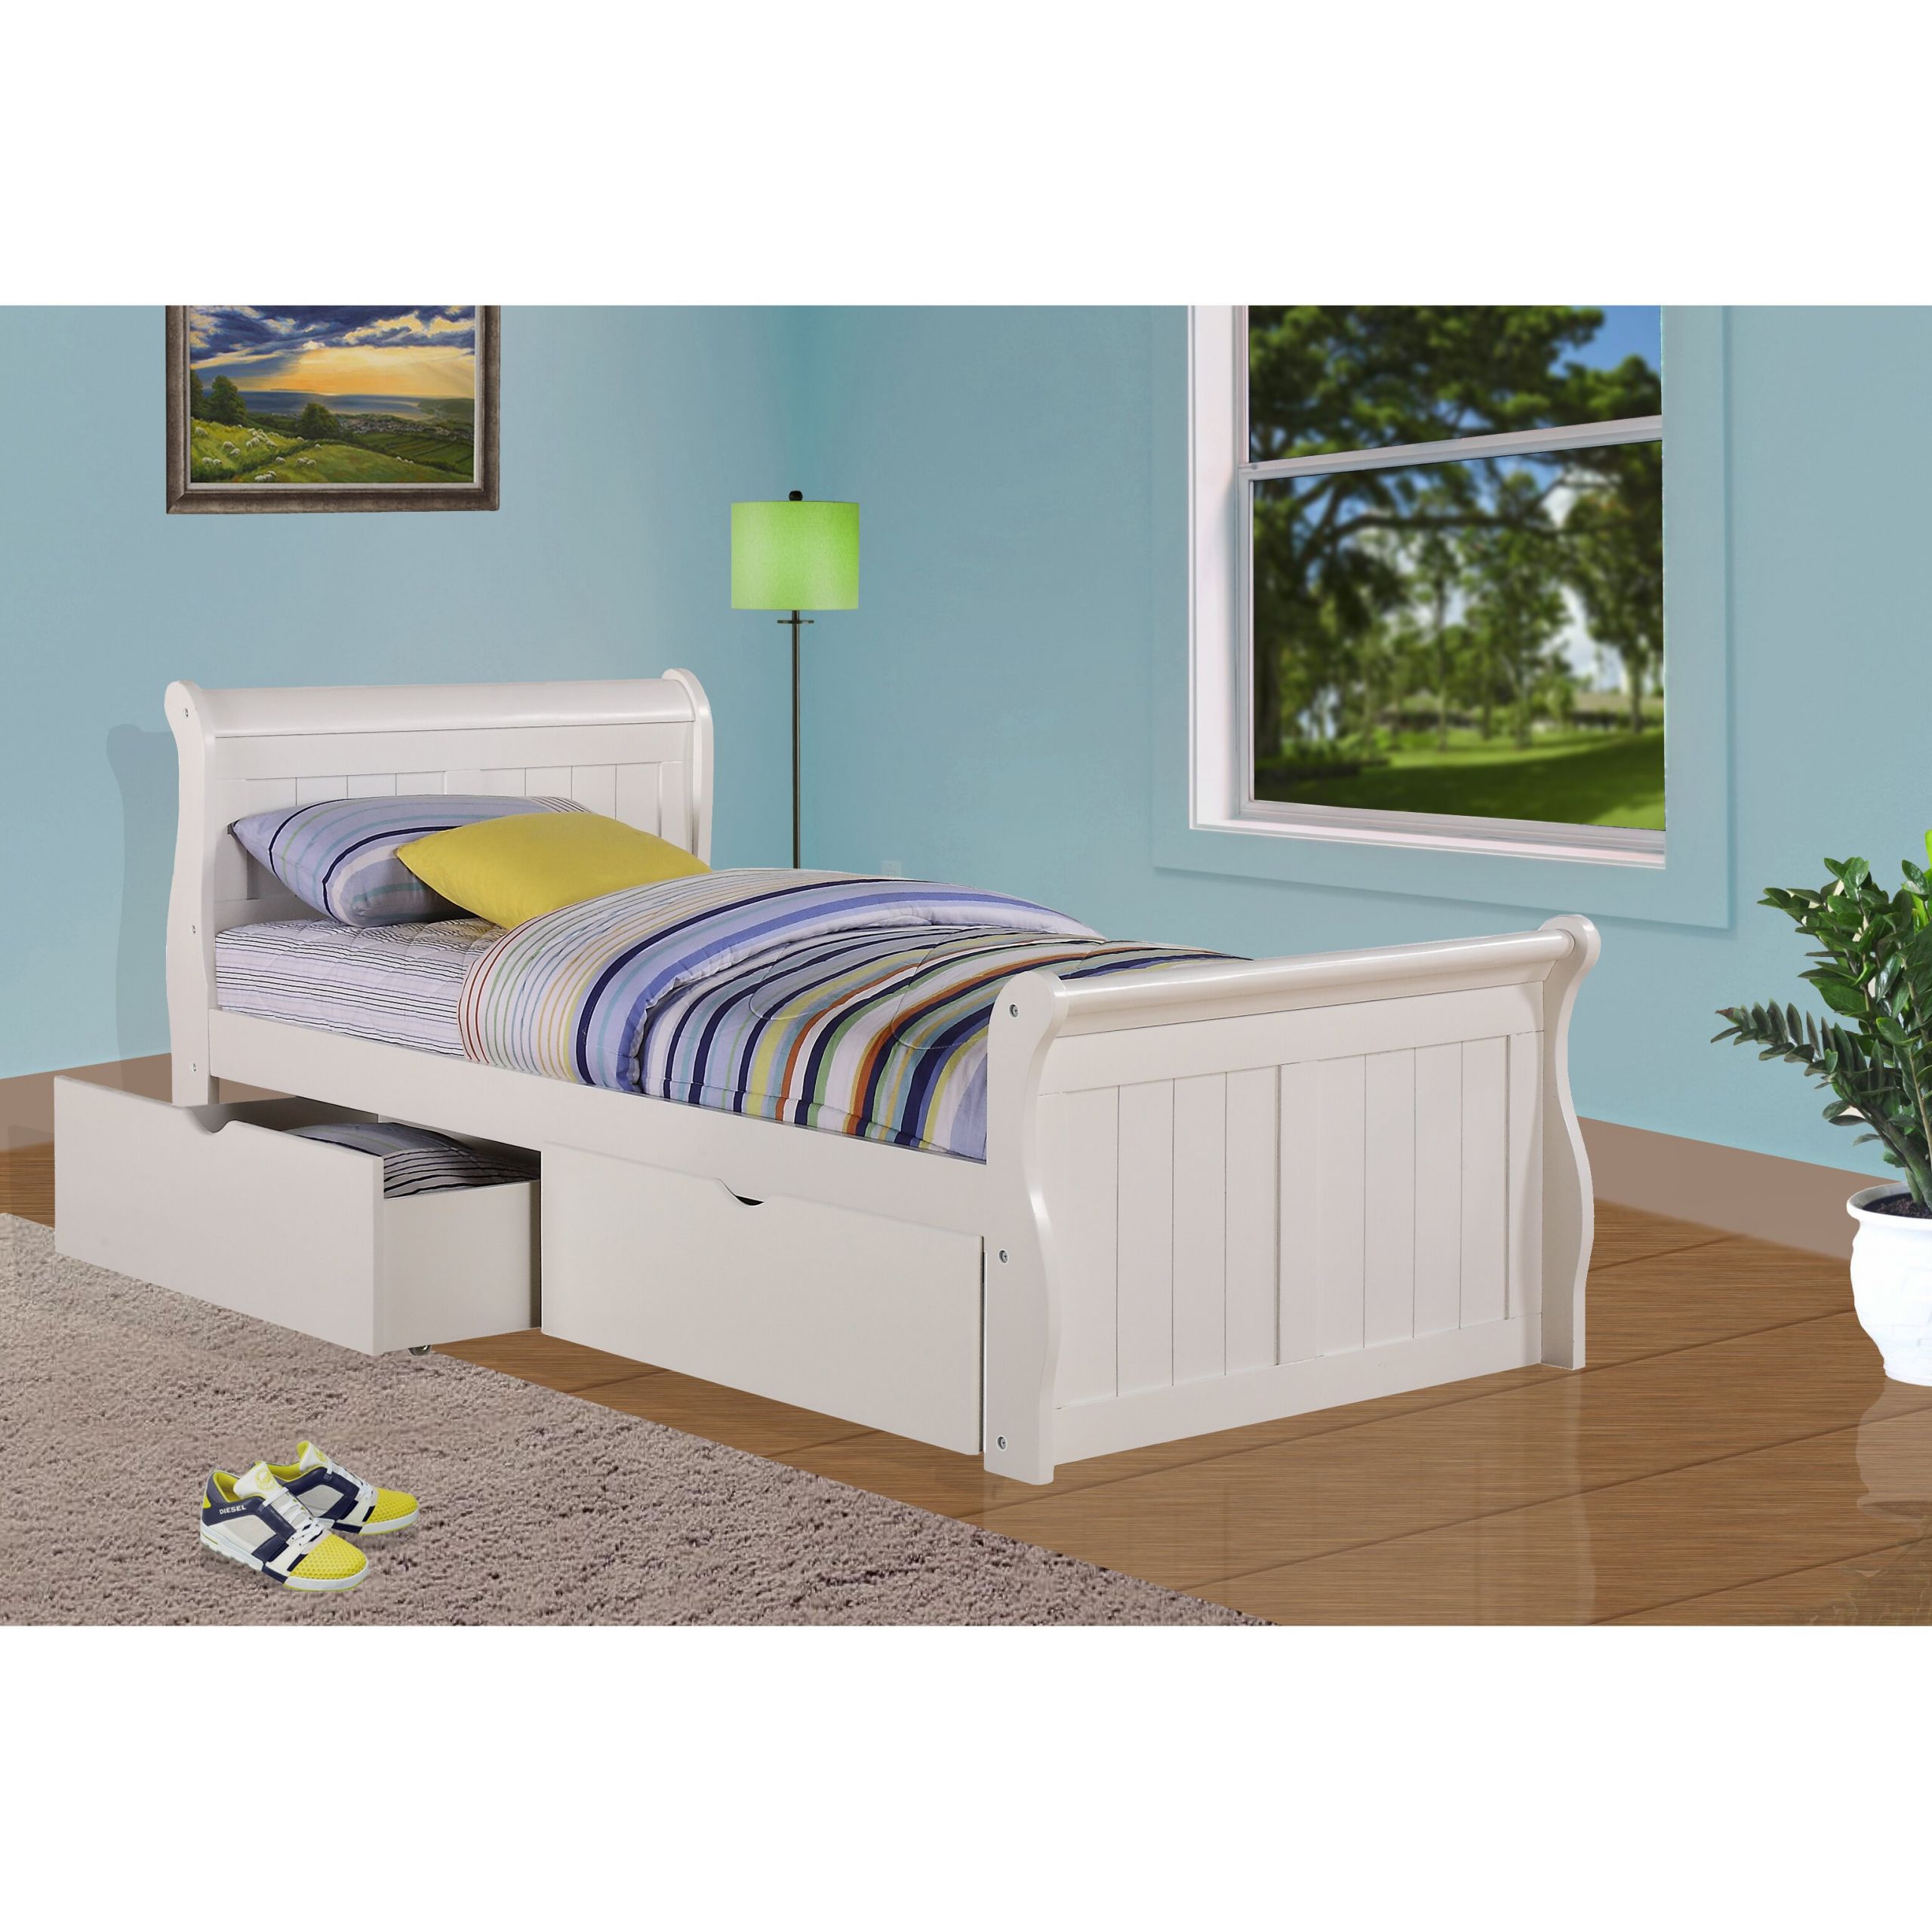 Kids Storage Bed
 Donco Kids Sleigh Bed with Storage & Reviews